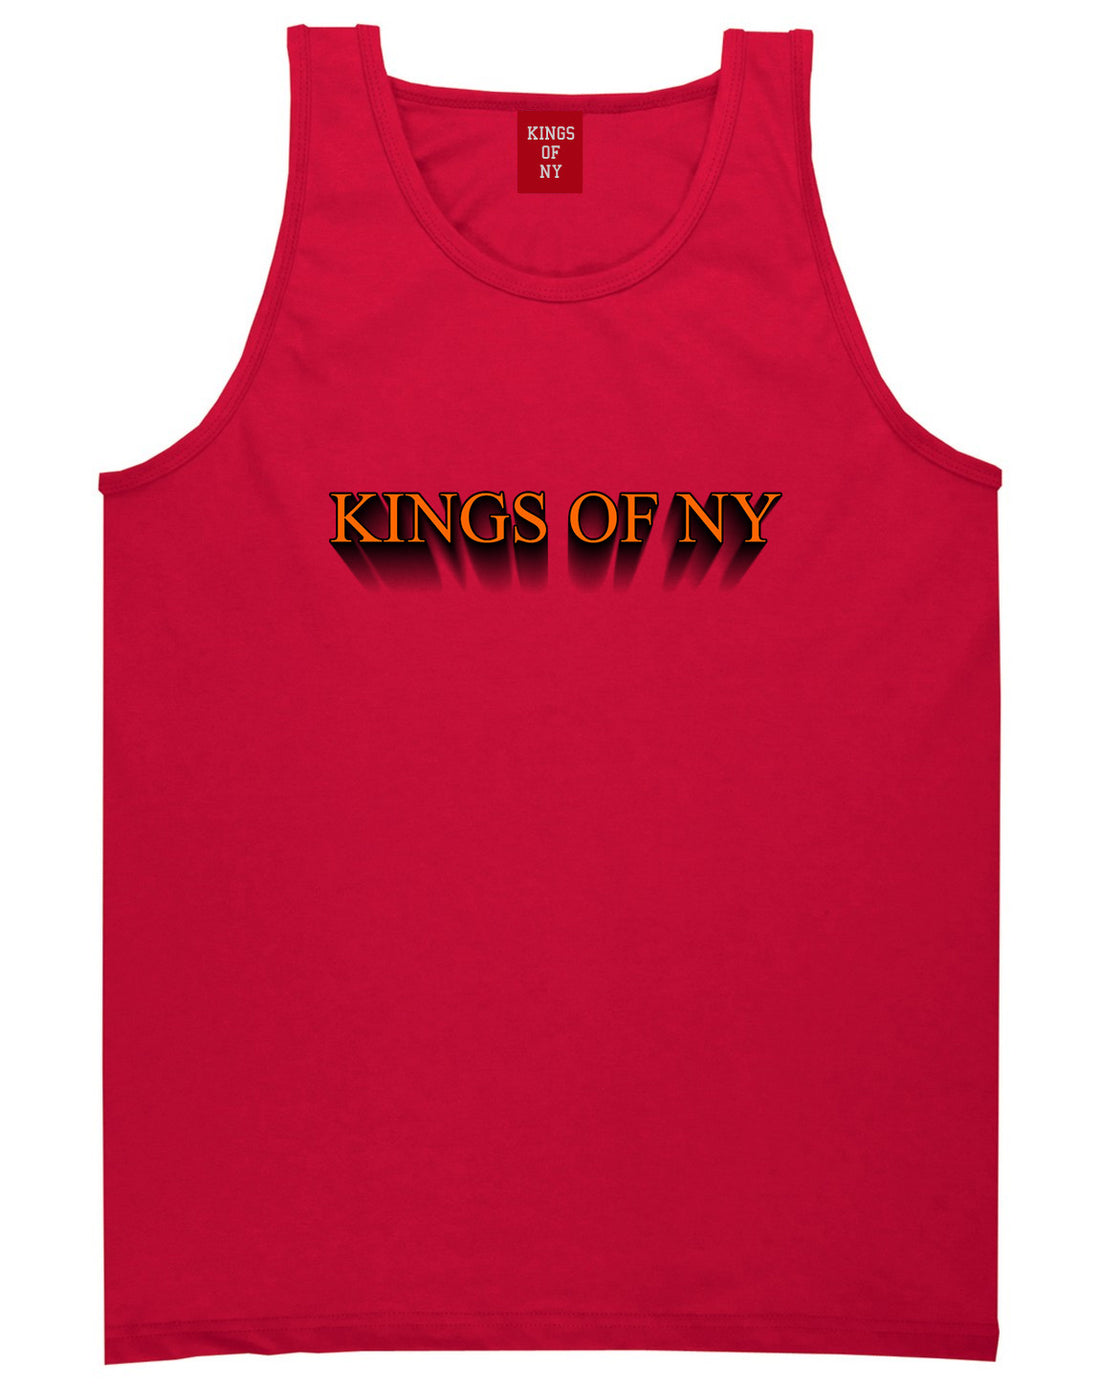 3D Text Tank Top in Red